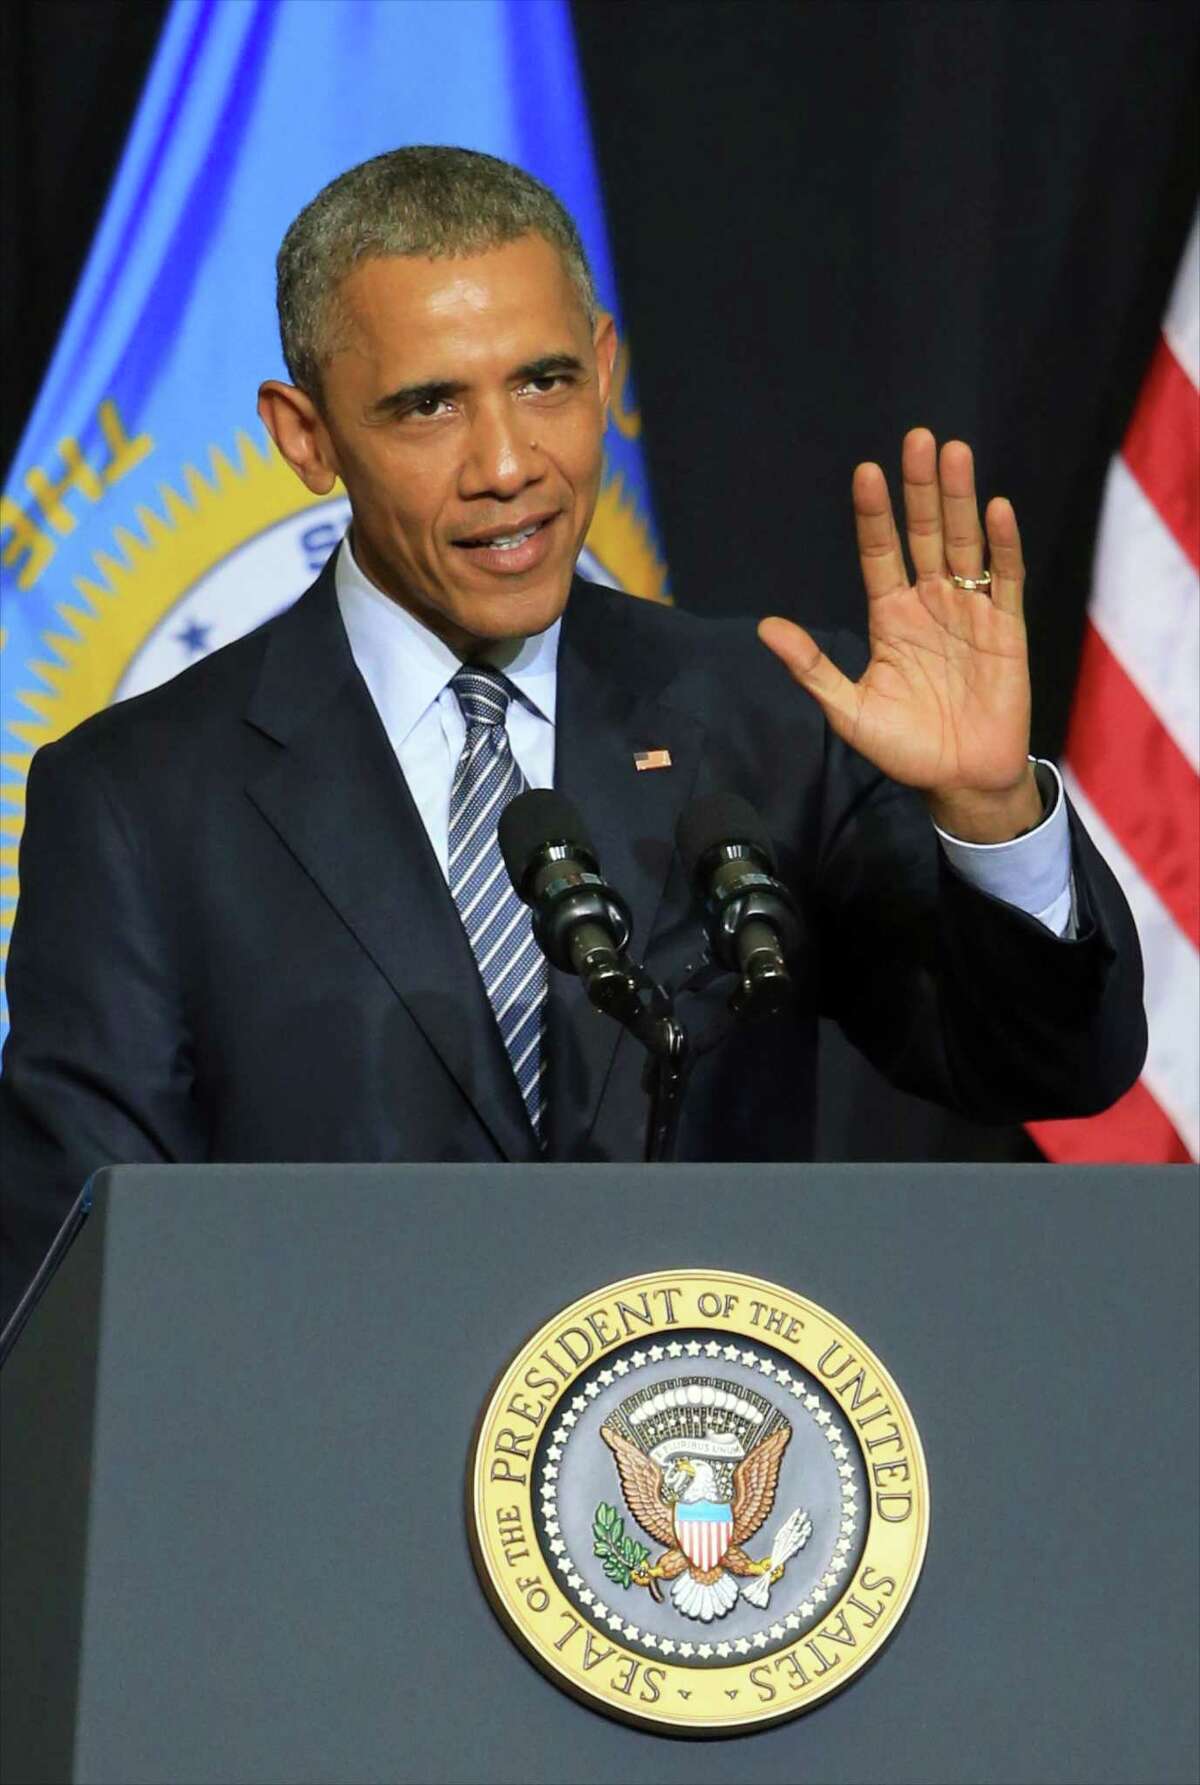 President Barack Obama delivers the commencement address to the 2015 graduating class of Lake Area Technical Institute, in Watertown, S.D. on May 8, 2015.